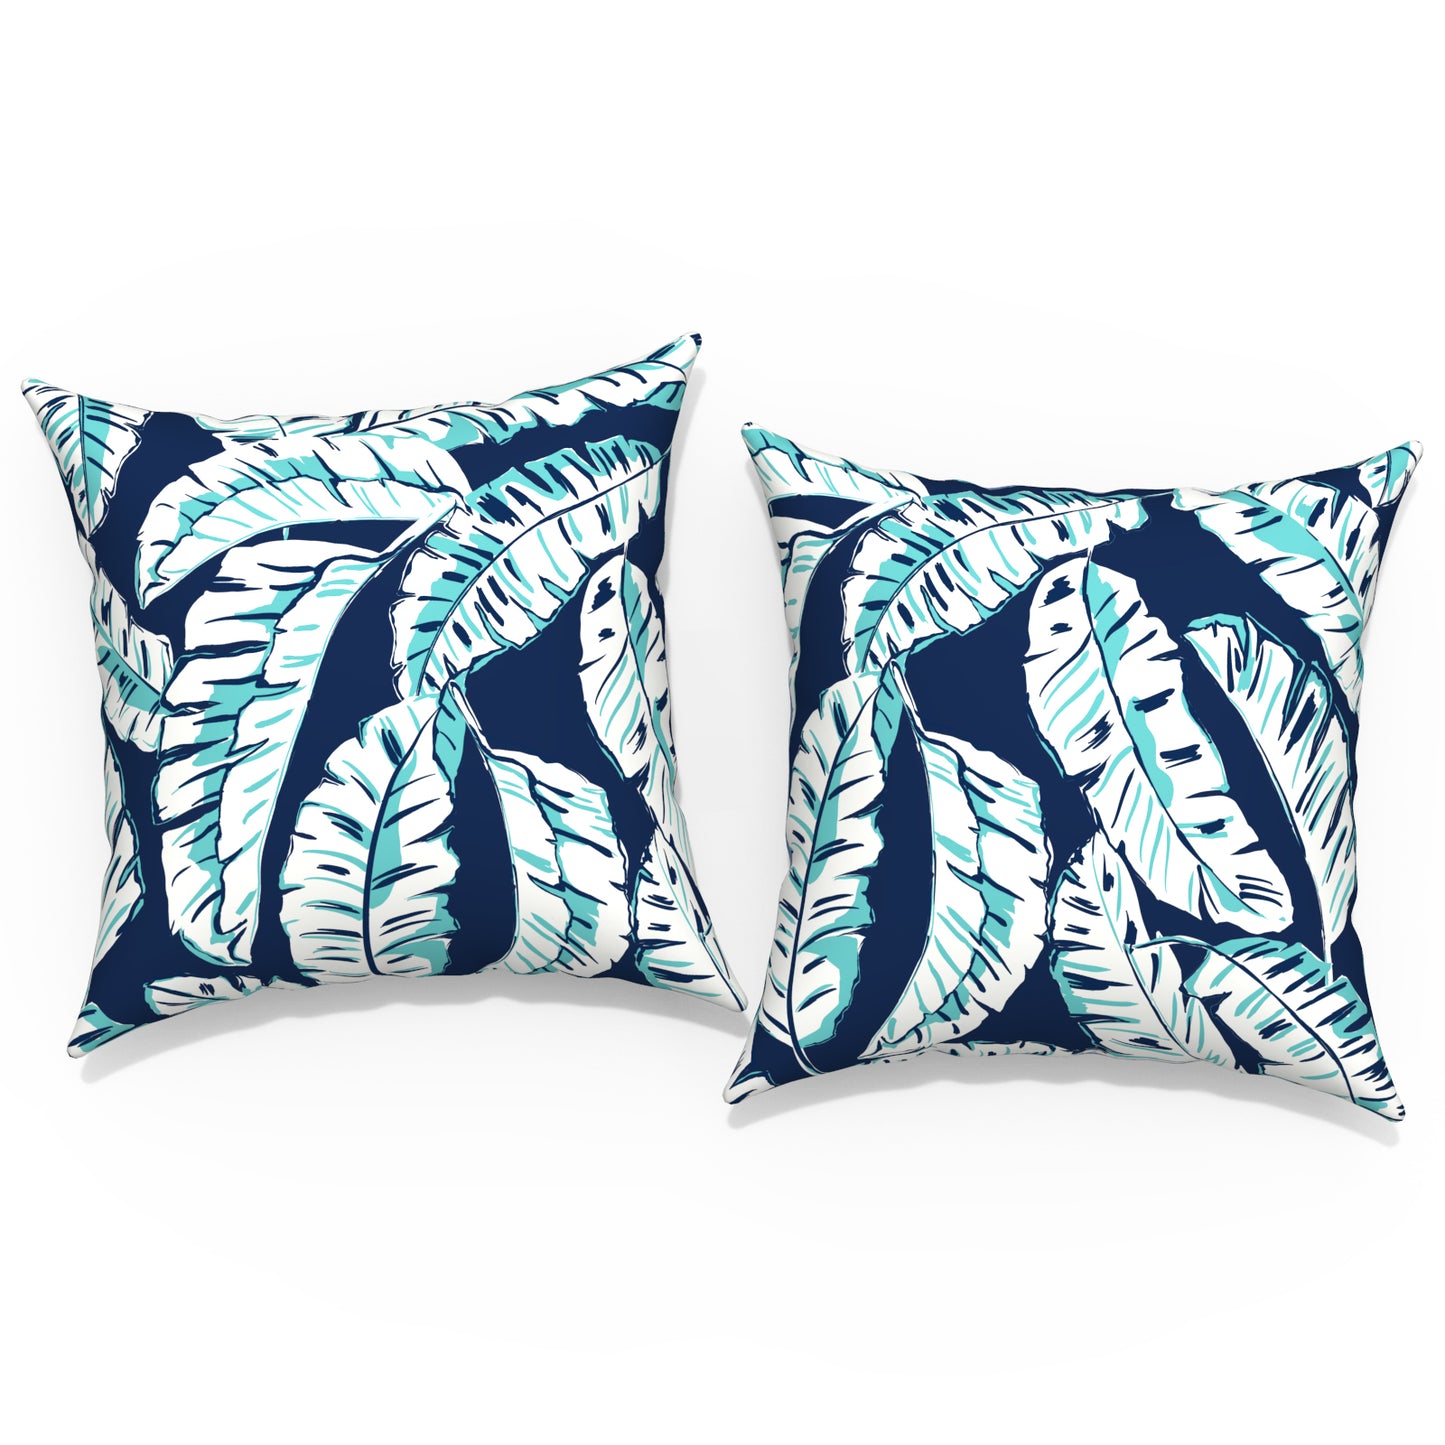 Melody Elephant Outdoor/Indoor Throw Pillow Covers Set of 2, All Weather Square Pillow Cases 16x16 Inch, Patio Cushion Pillow of Home Furniture Use, Baltic Palms White